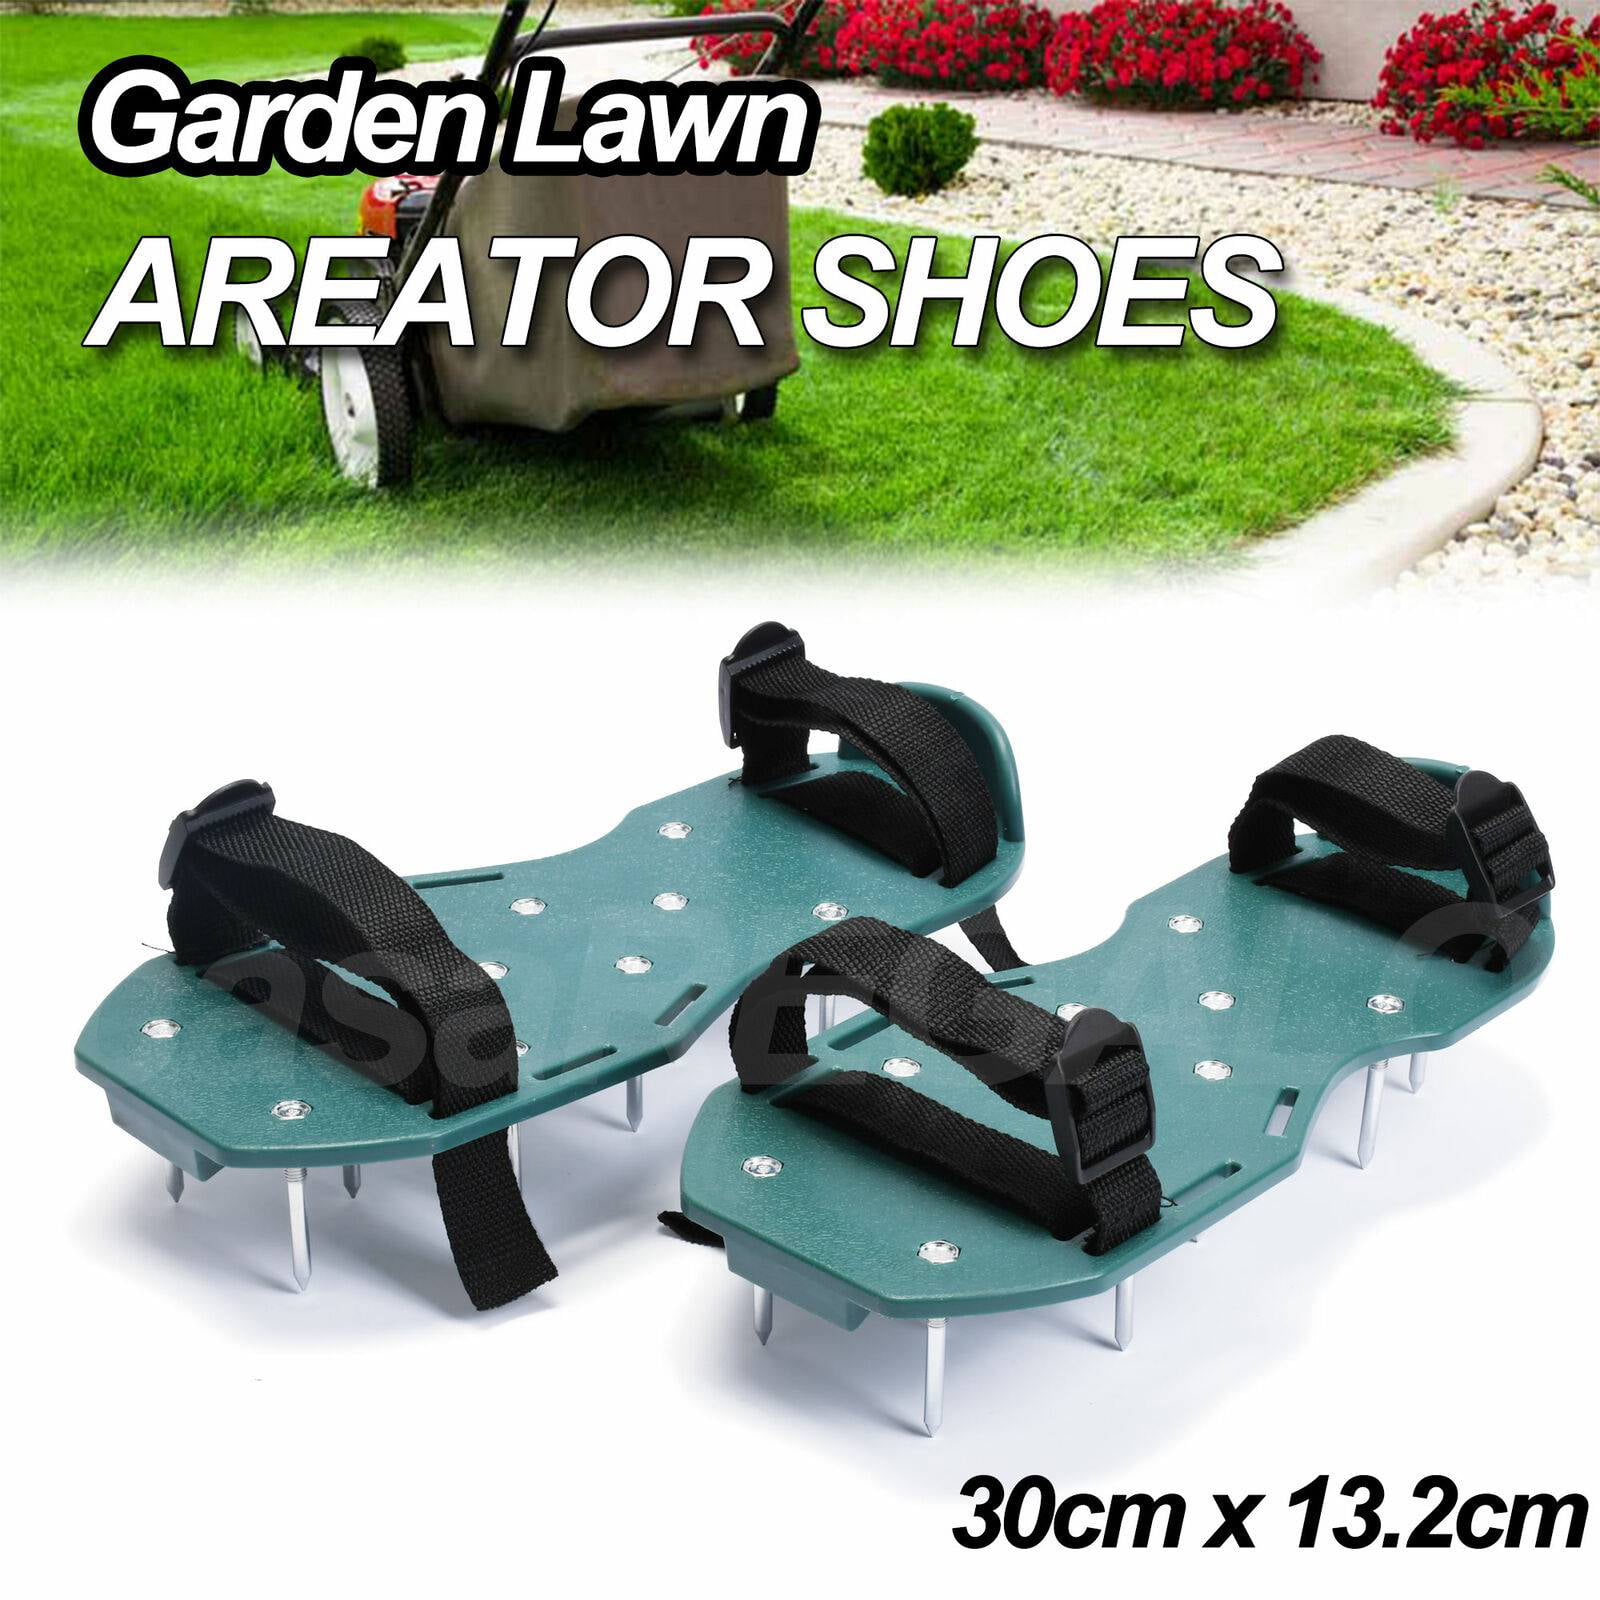 Lawn Sod Aerators shoes Spikes Aerating Sandals Garden Grass Tools N9D6 